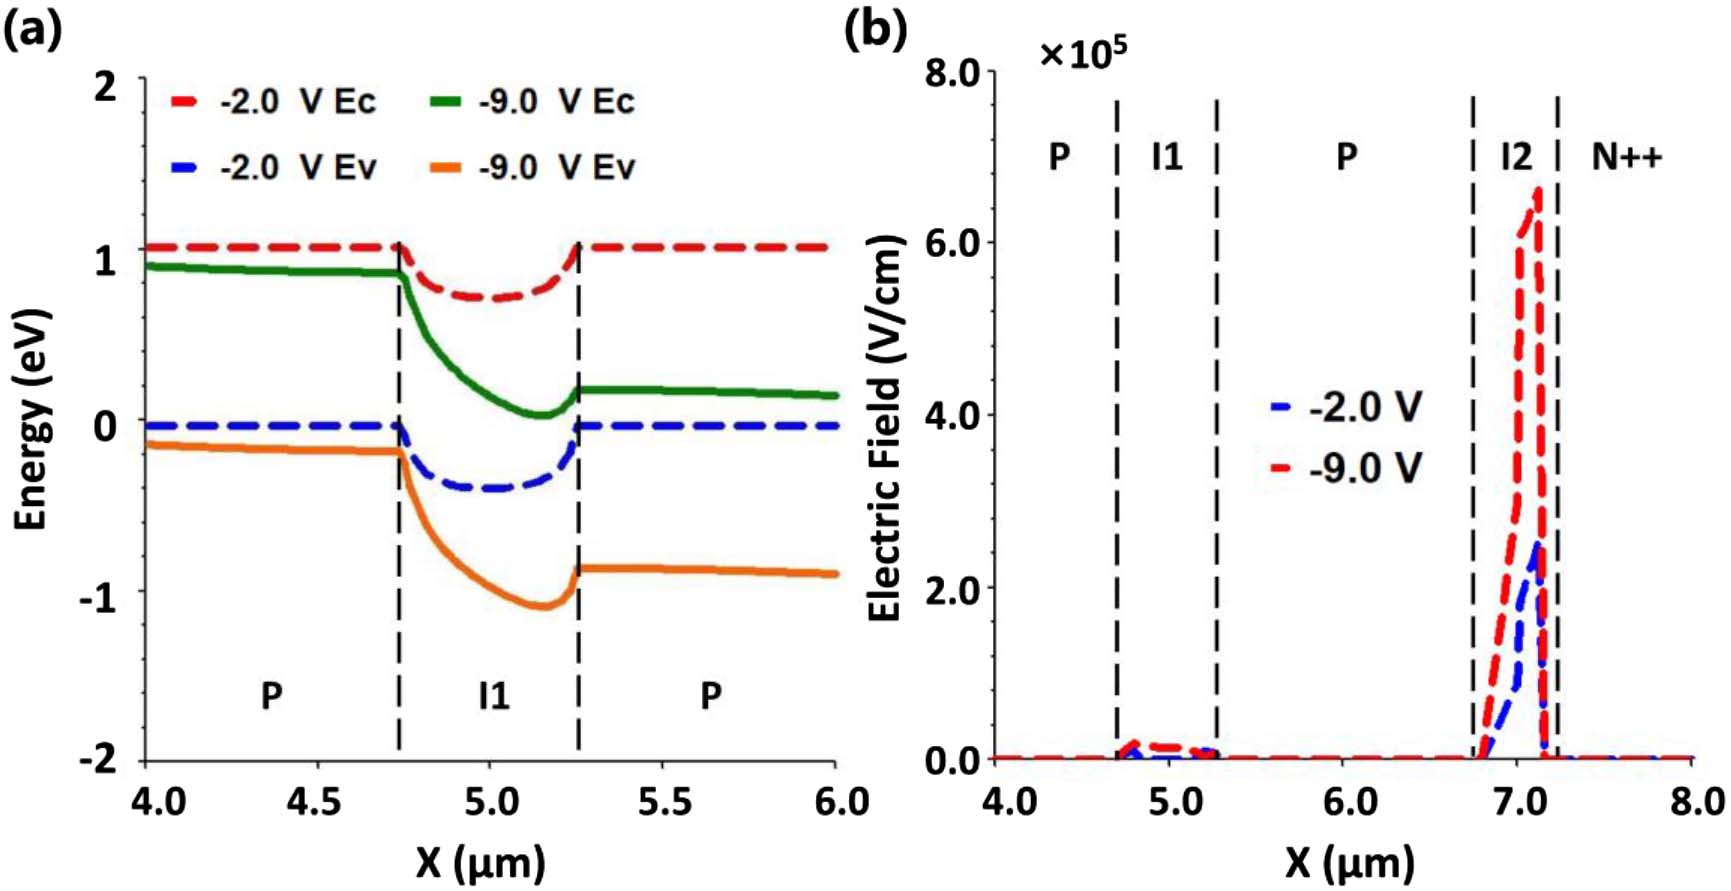 (a) Distribution of valence and conduction bands in the I1 region at -2 V and -9 V (Vex = 20%Vbr). (b) The electric field distribution in the Si substrate at -2 V and -9 V.